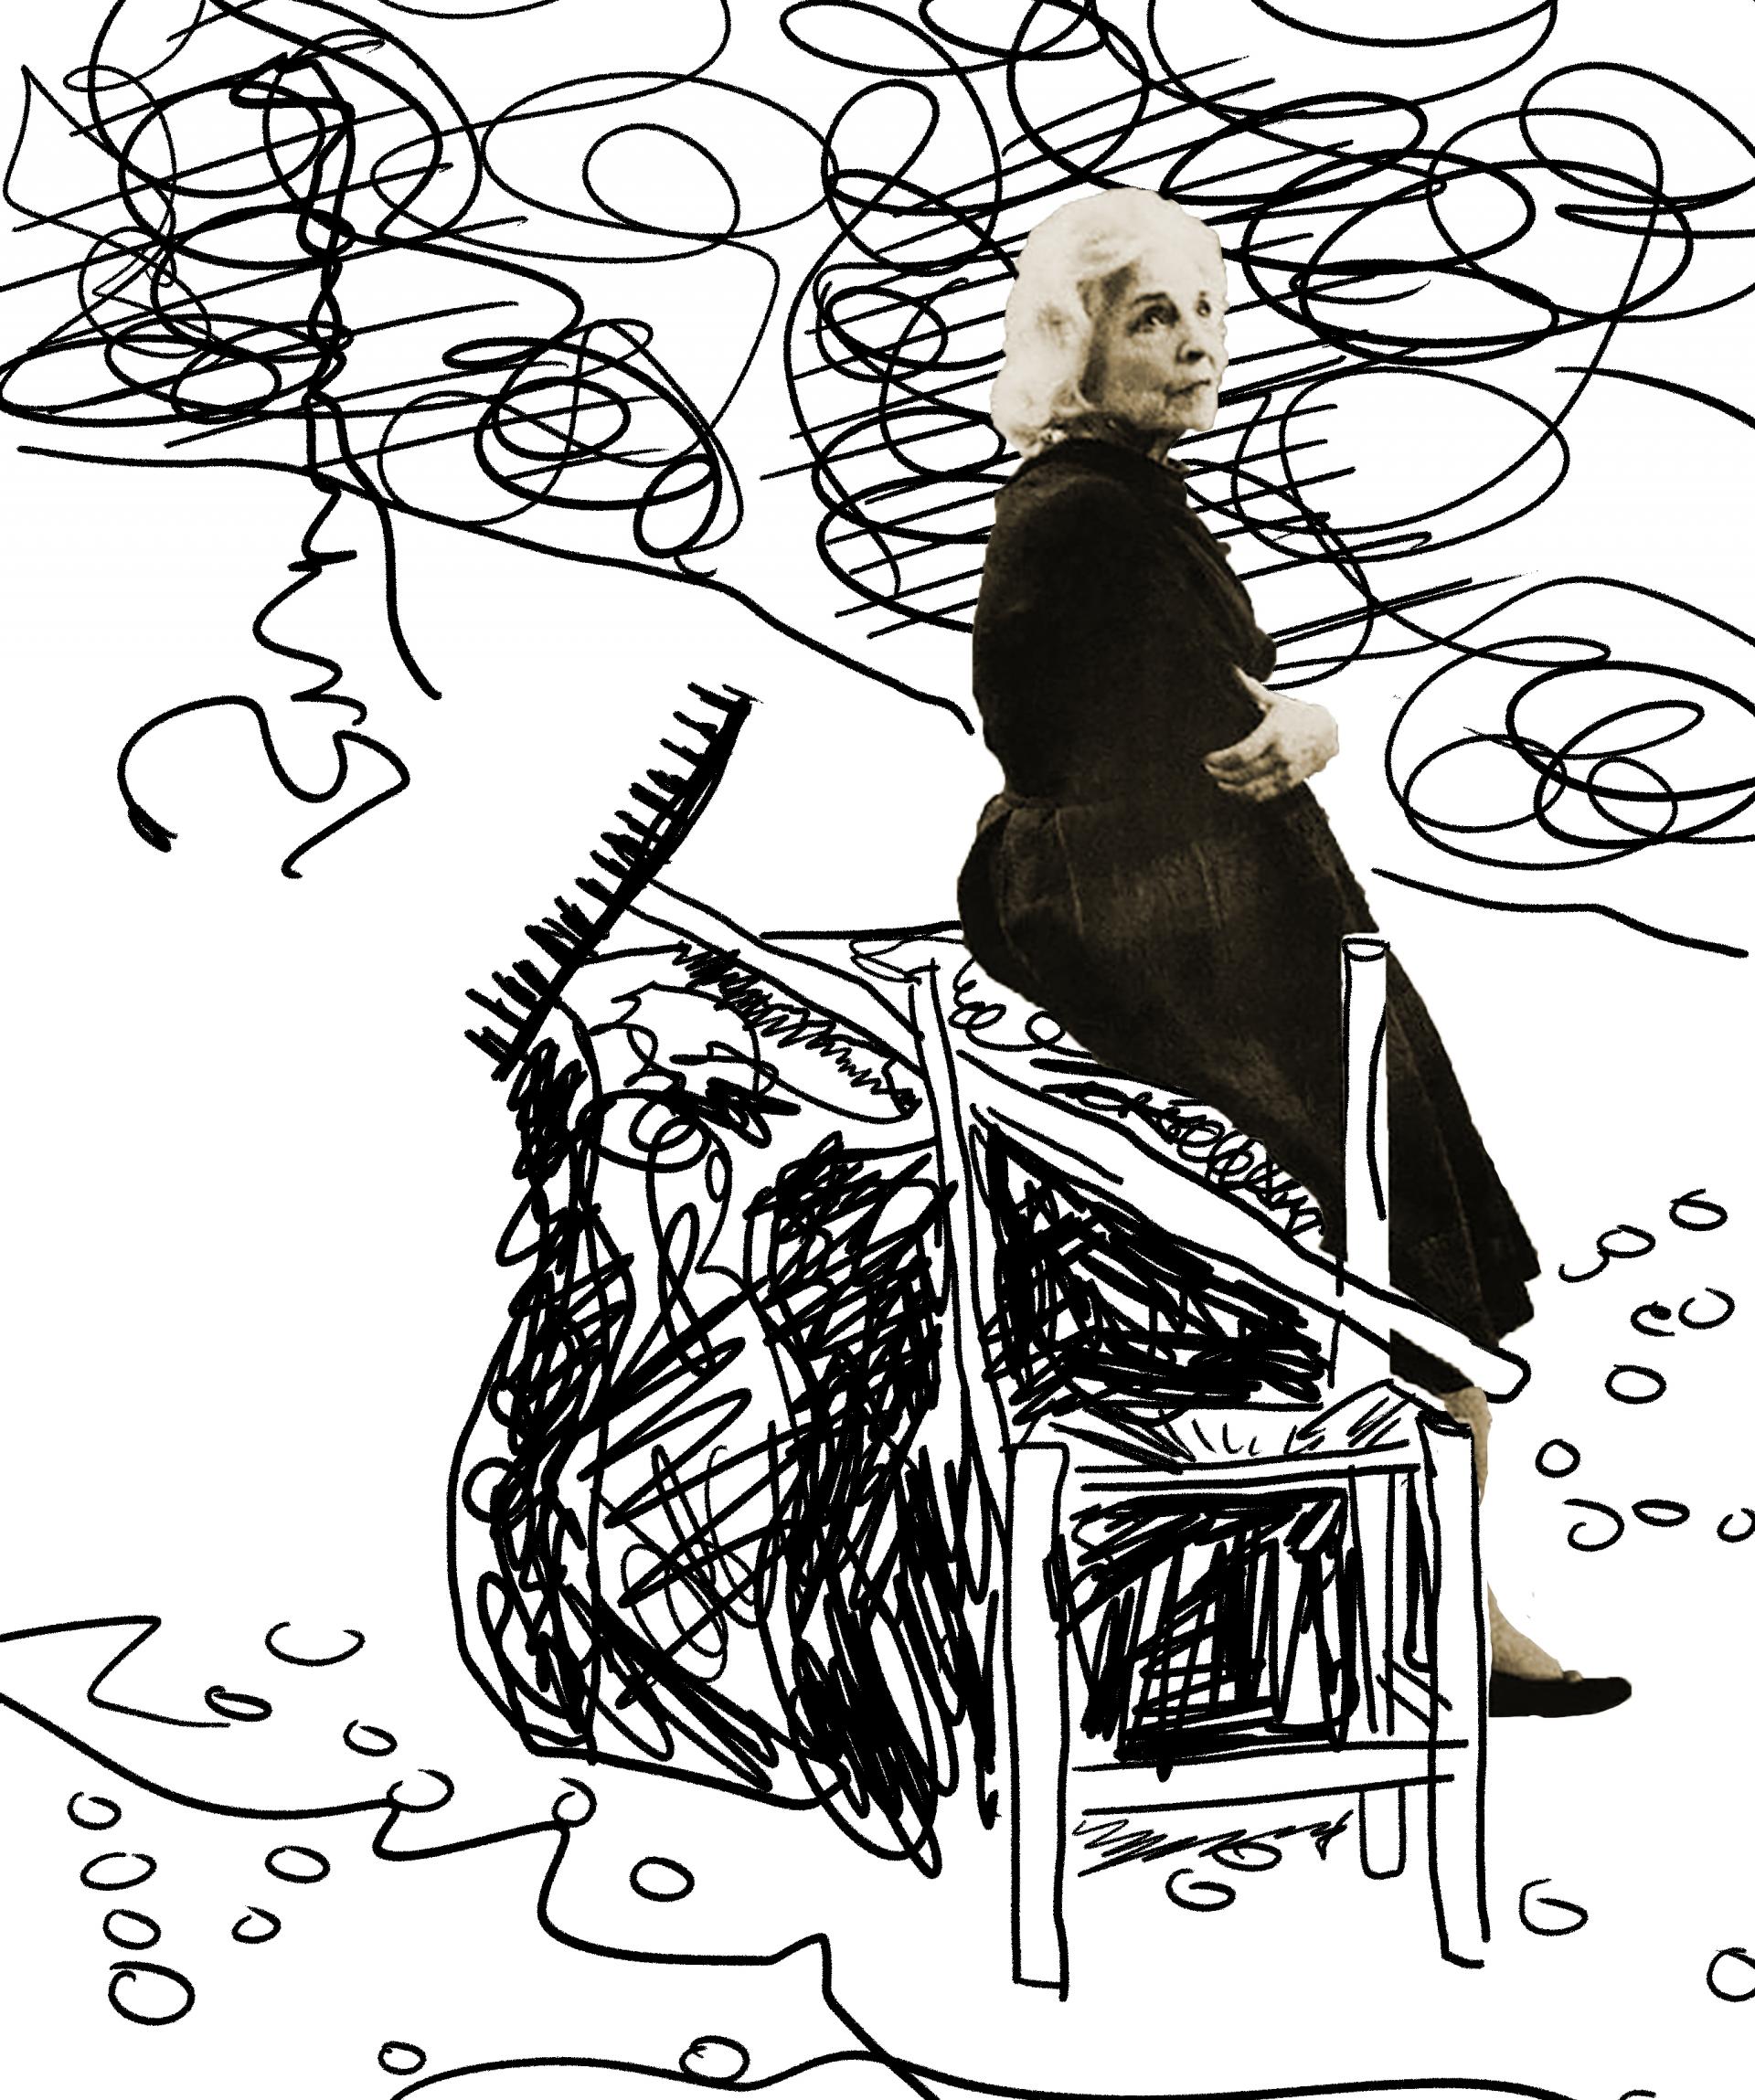 Delia del Carril sits on a large rock with a rake and a broken chair, the background is hand drawn